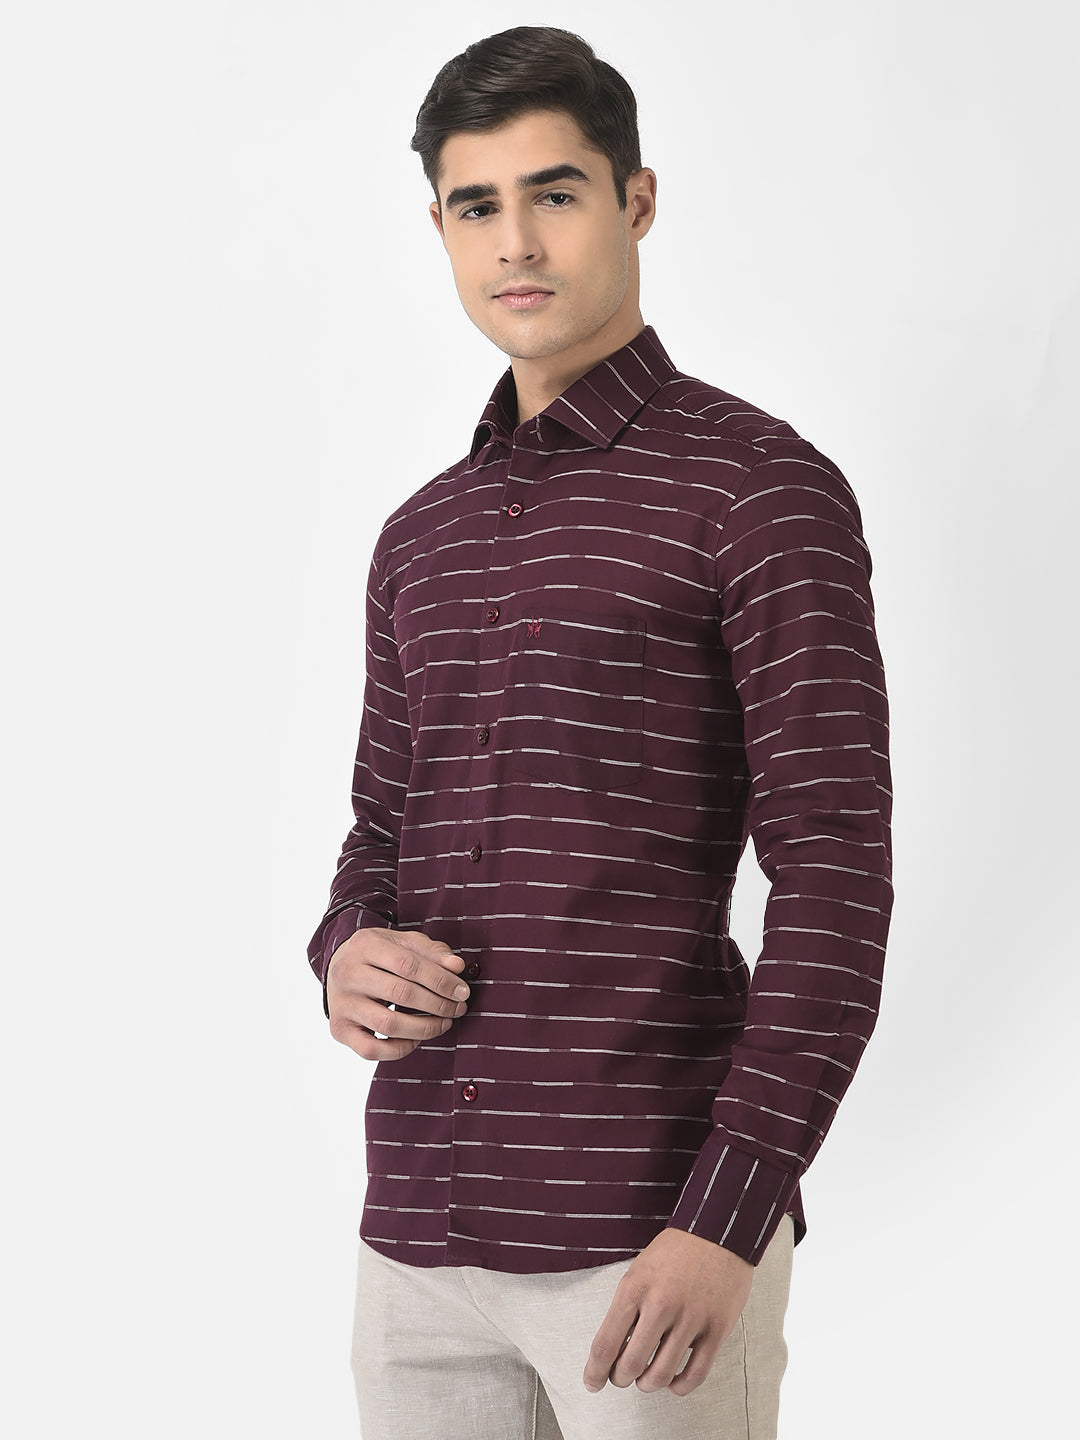  Maroon Shirt in Pure Cotton